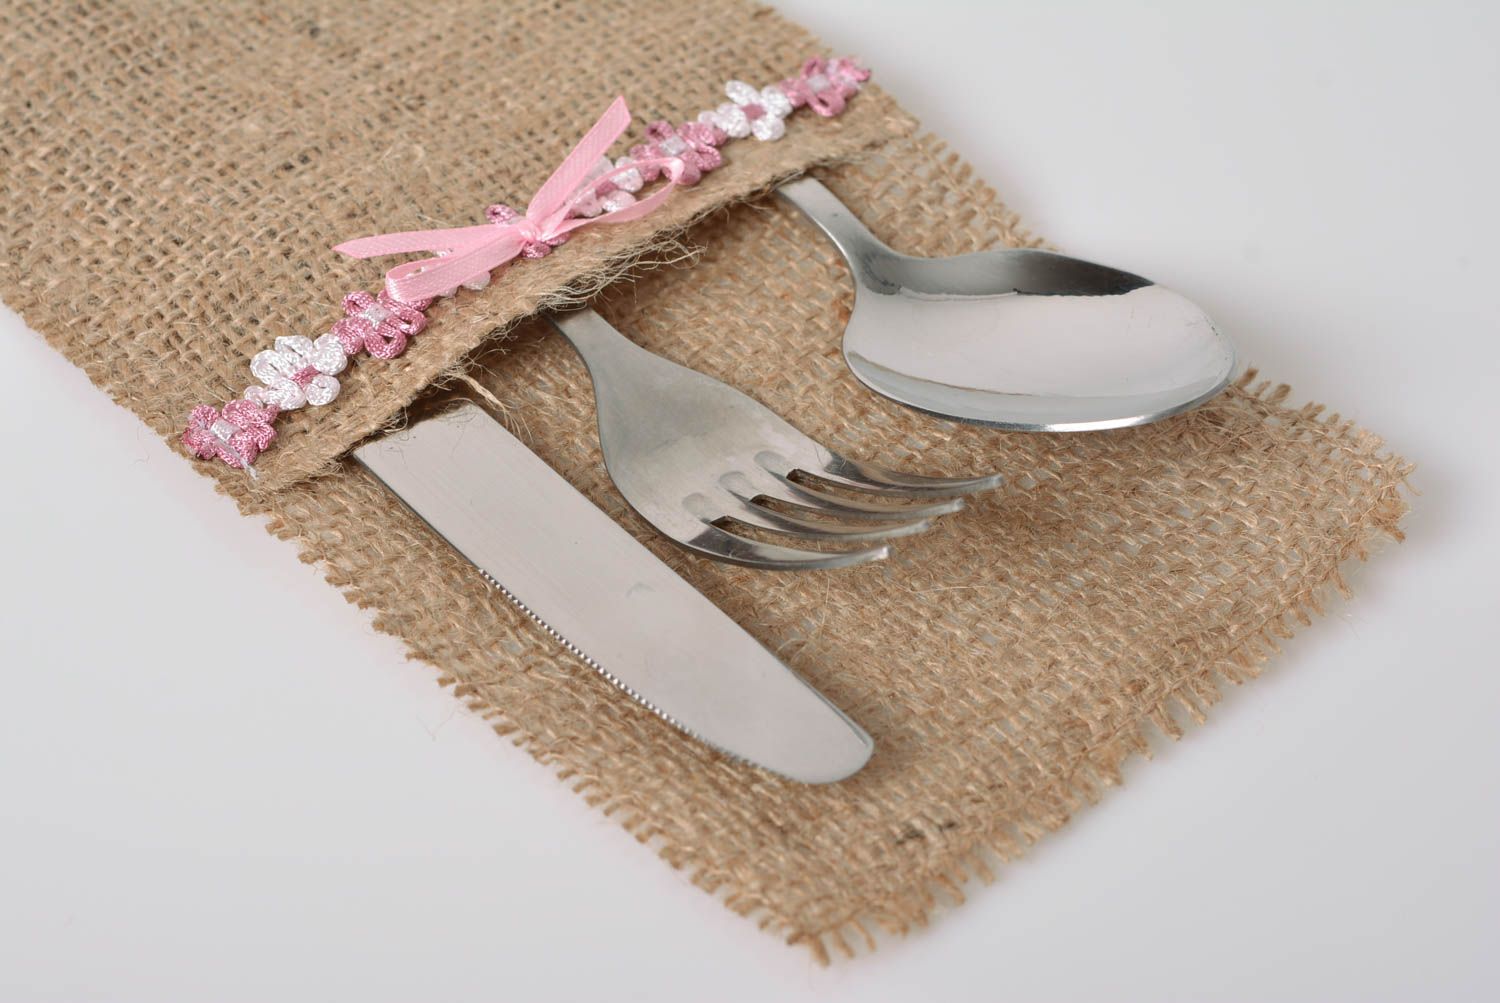 Case for cutlery made of burlap beautiful handmade eco clean kitchen decor photo 3